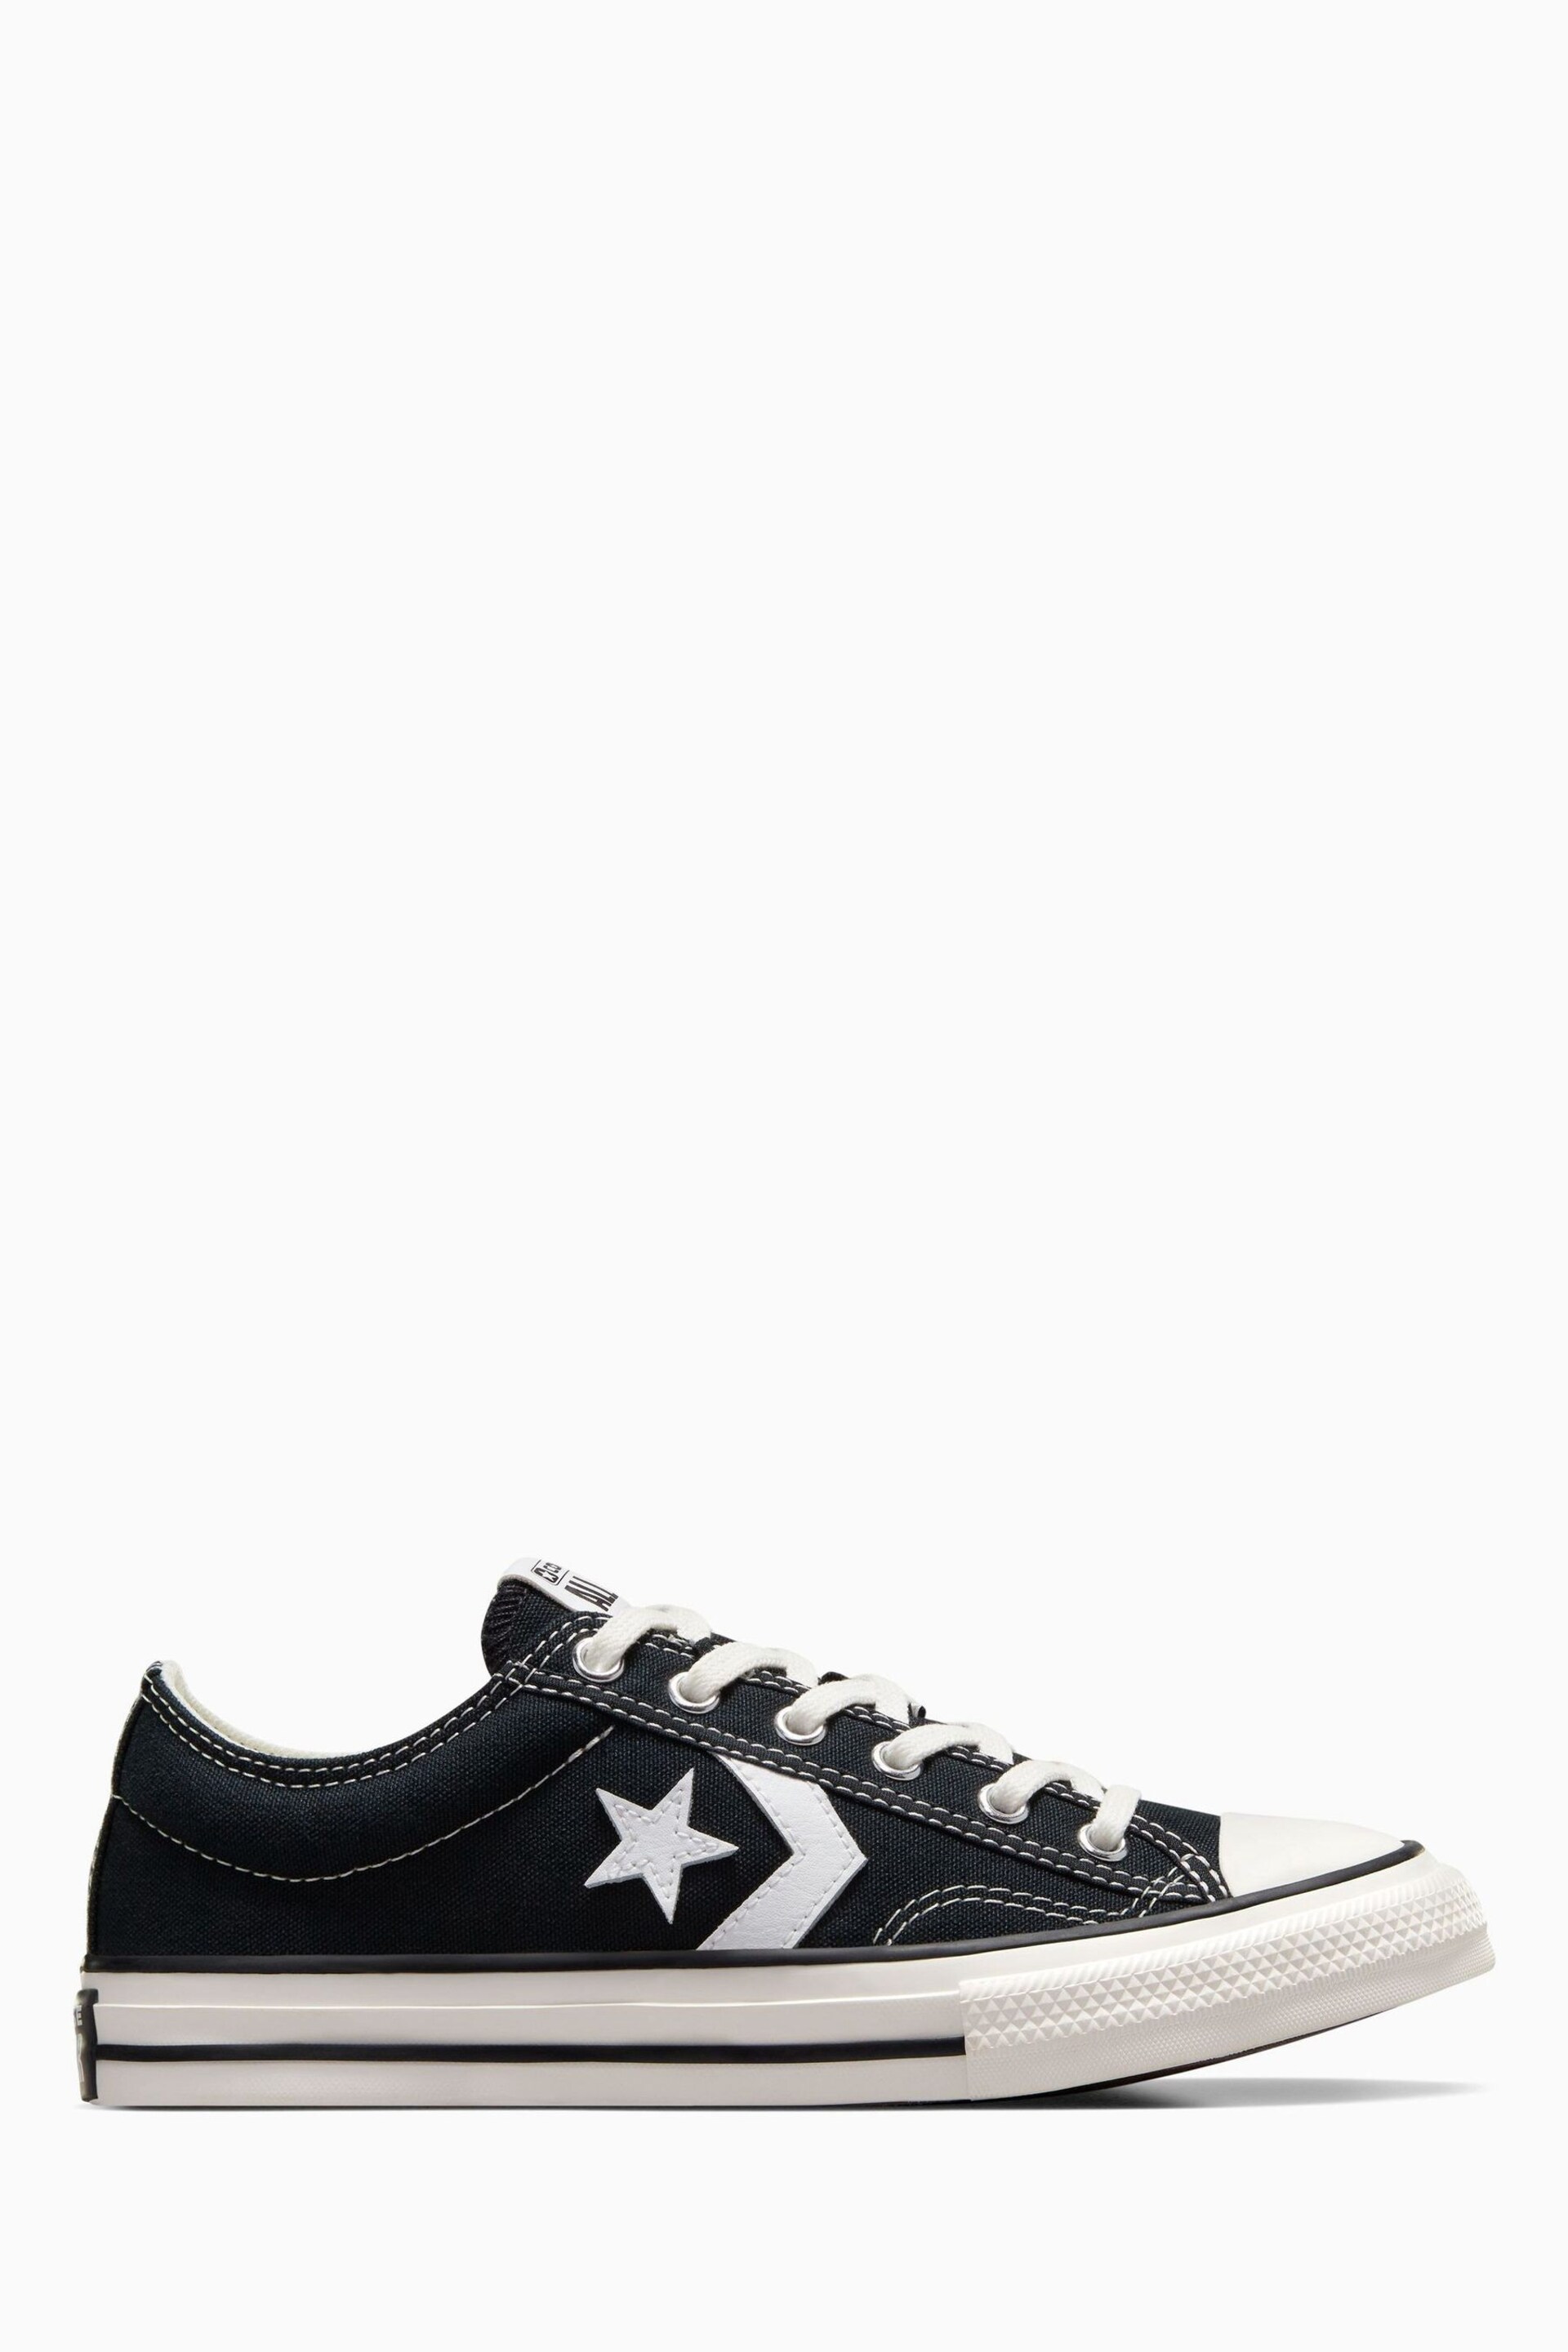 Converse Black Youth Star Player 76 Trainers - Image 1 of 8